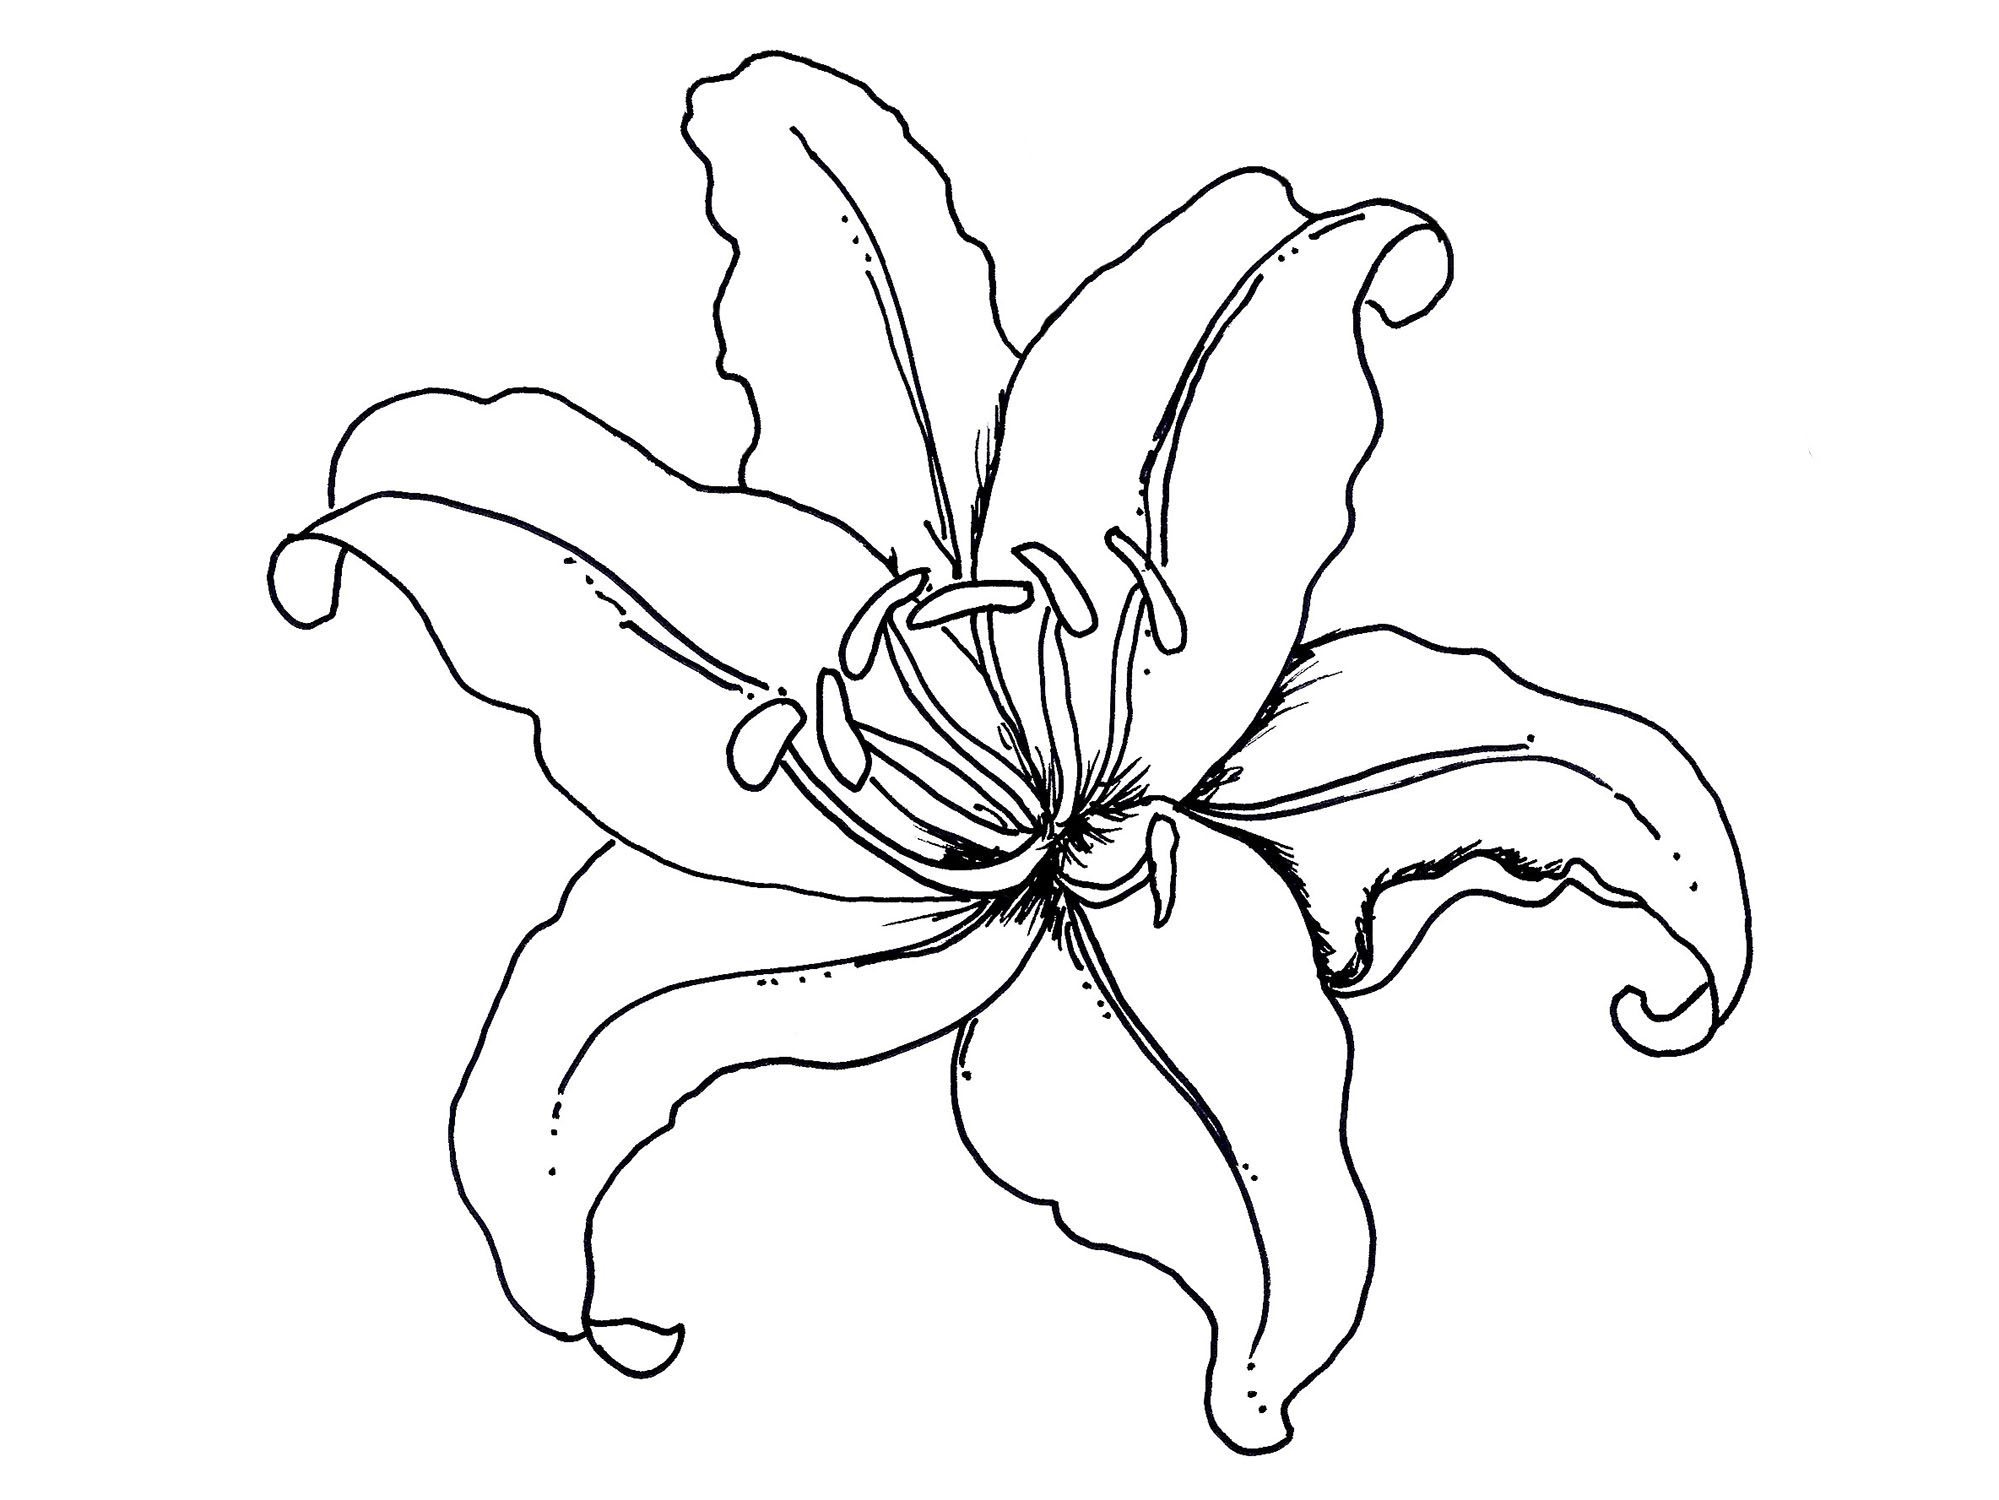 Lotus Flower Coloring Page. flower mandala coloring pages ...